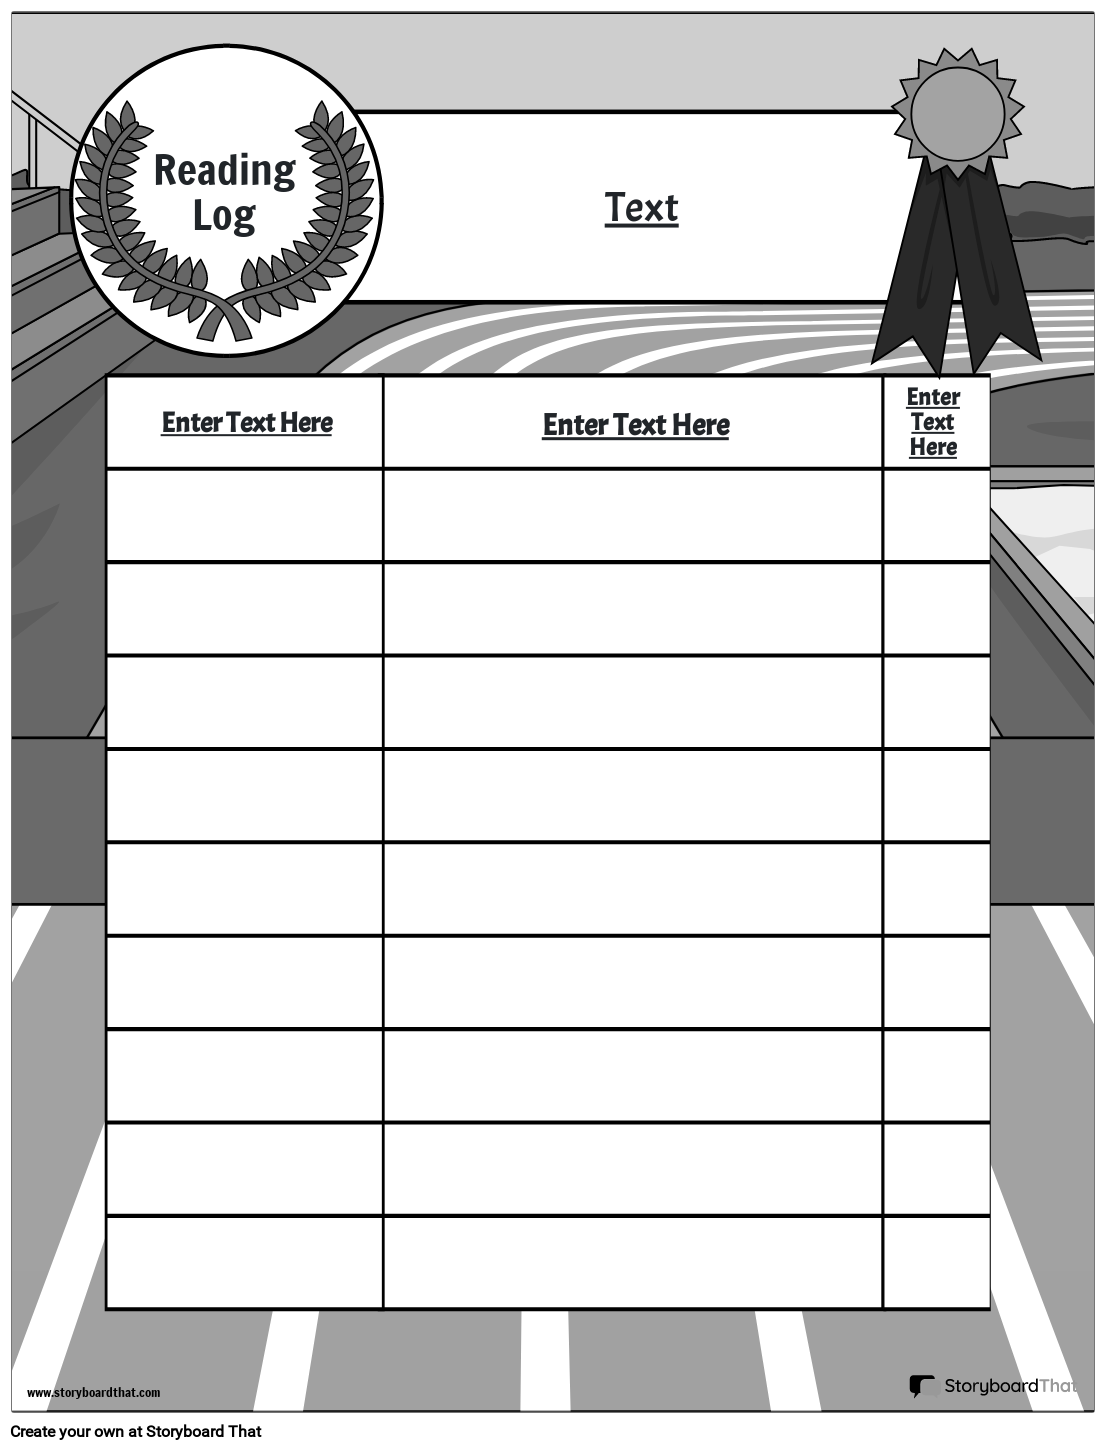 Reading Log Worksheet Template Featuring a Medal